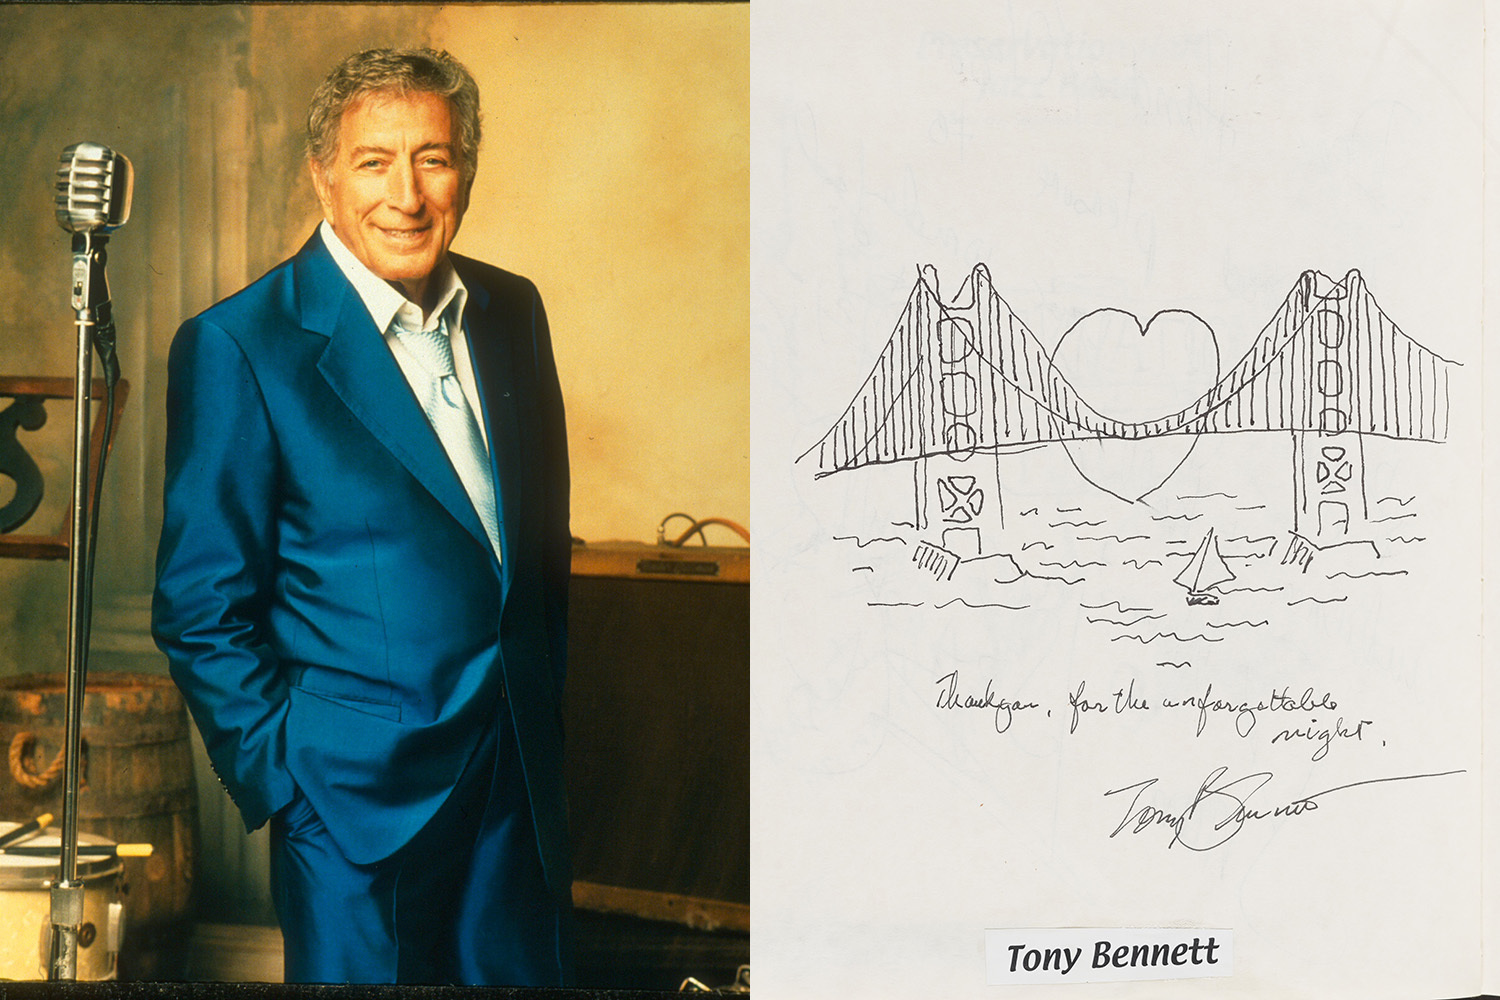 Tony Bennett, who performed in 2002 as part of Hancher's 30th anniversary, drew a picture and signed Hancher's guest book.